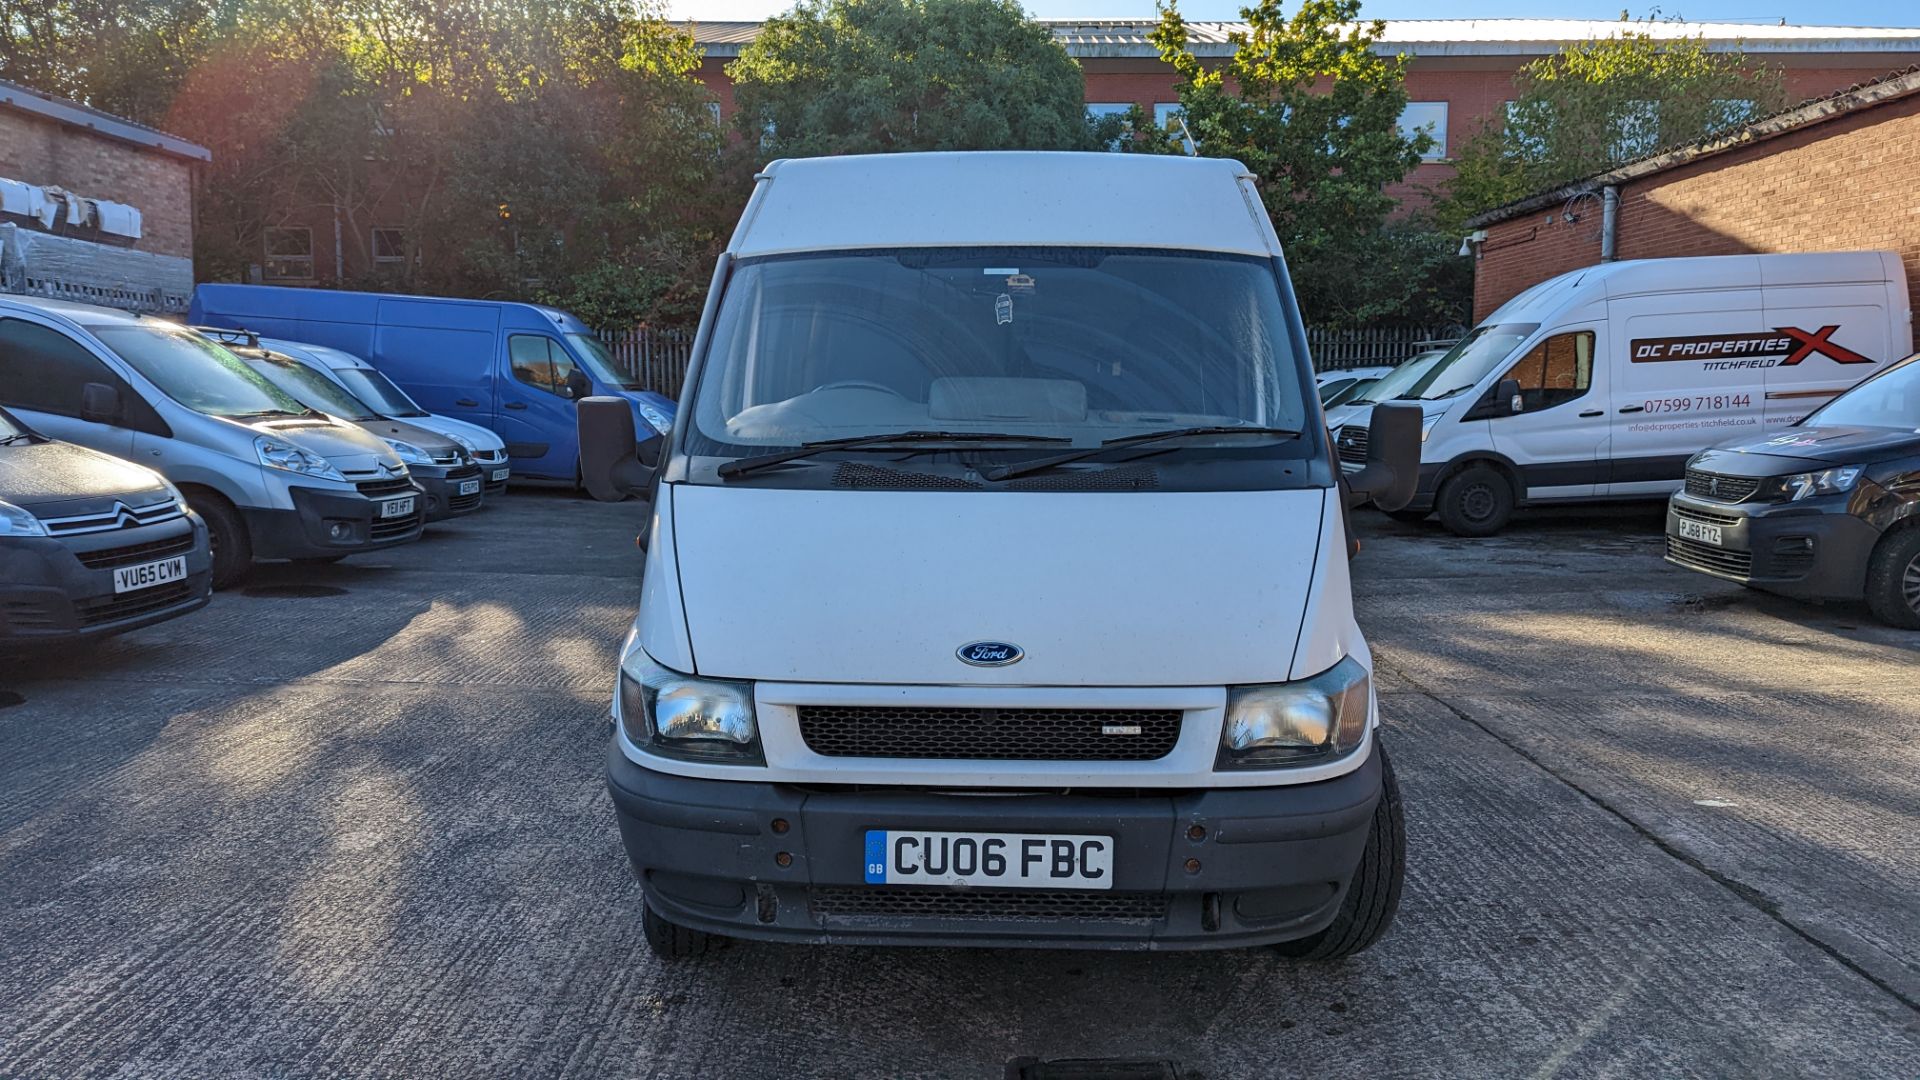 CU06 FBC Ford Transit panel van, 6 speed manual gearbox, 2402cc diesel engine. Colour: white. Fir - Image 42 of 44